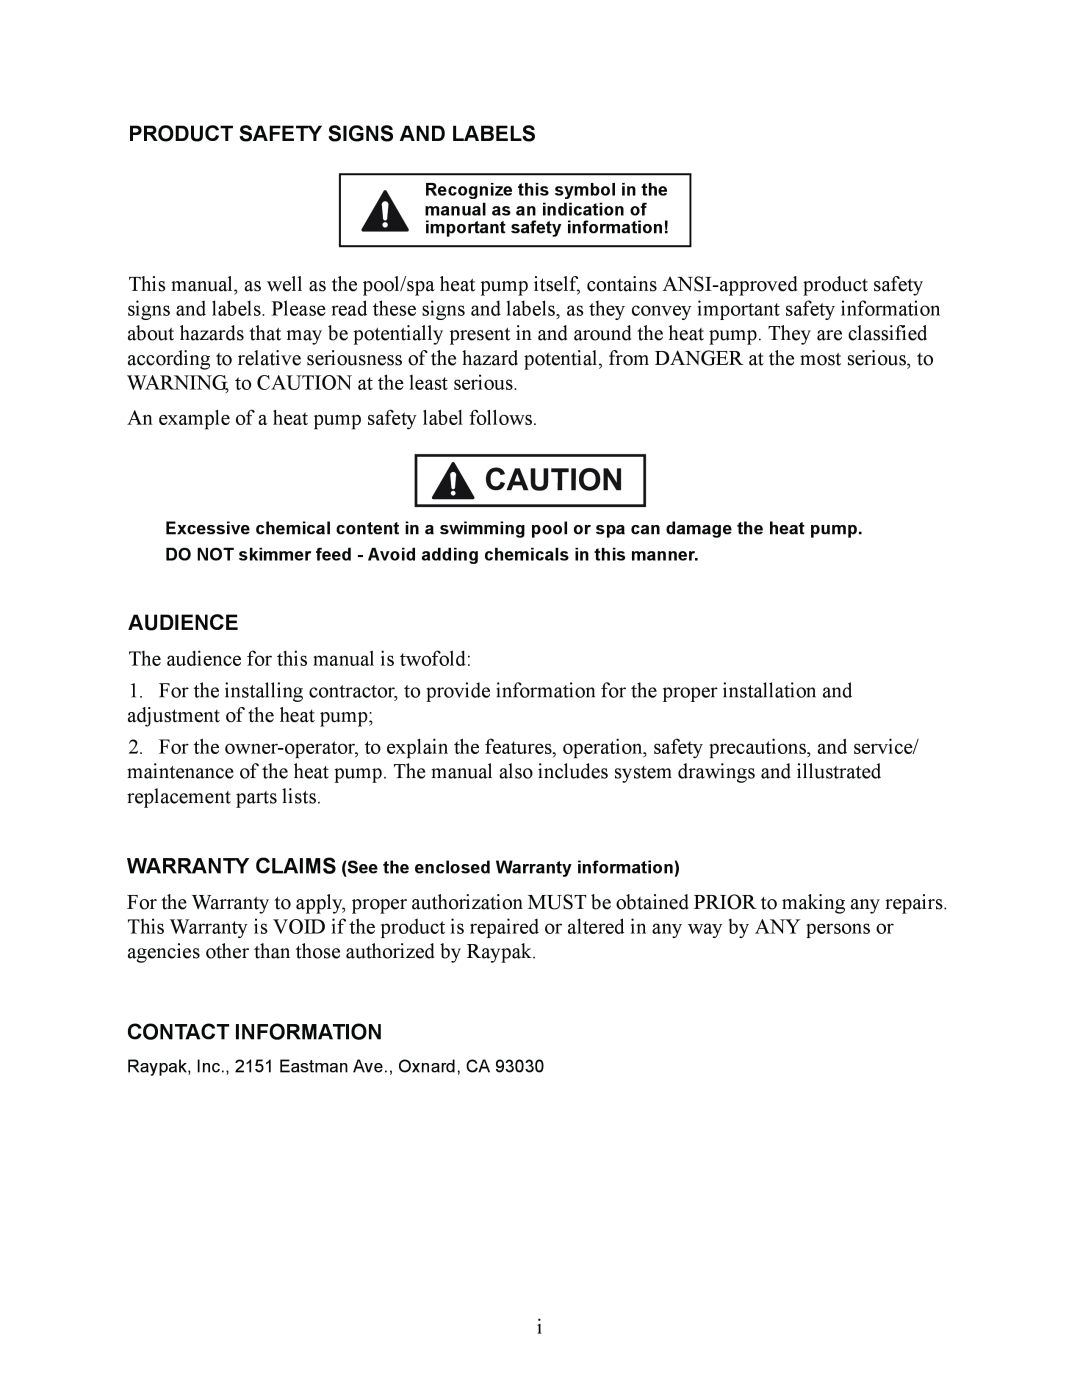 Raypak RHP160, RHP115, RHP100 installation manual Product Safety Signs And Labels, Audience, Contact Information 